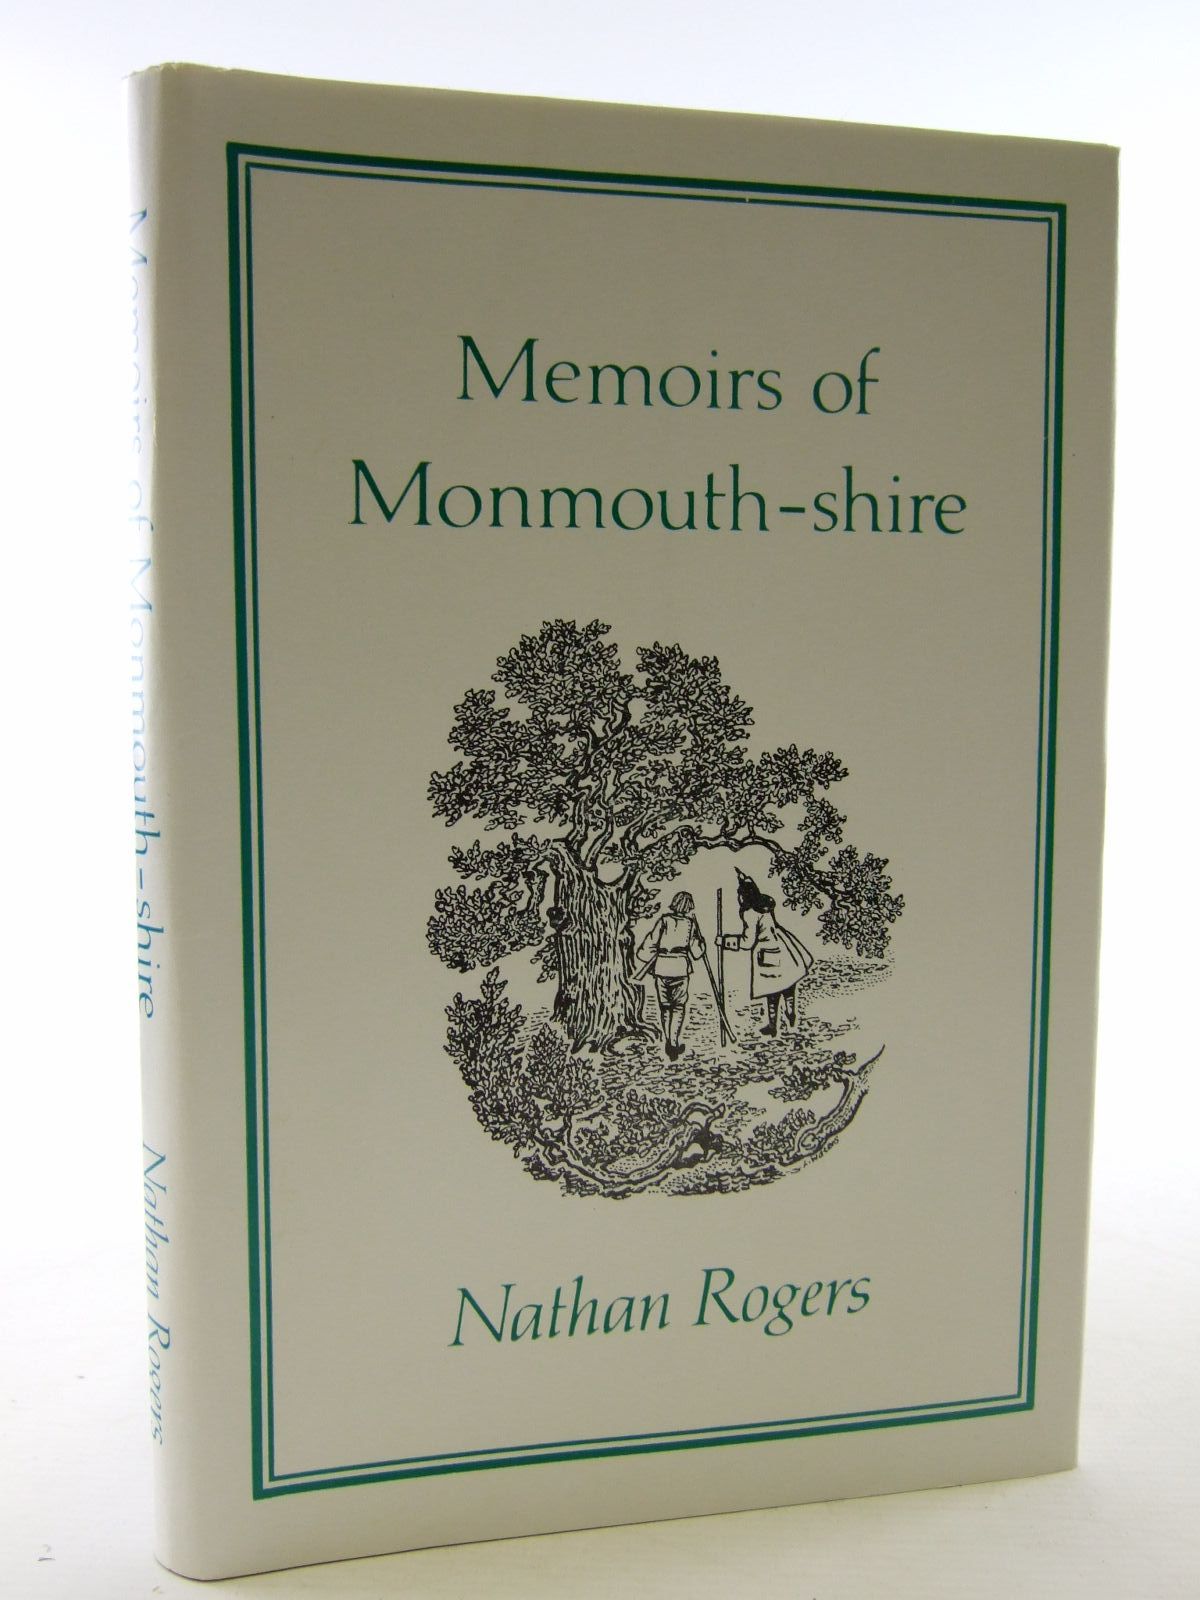 Photo of MEMOIRS OF MONMOUTH-SHIRE 1708 written by Rogers, Nathan illustrated by Waters, Linda published by Moss Rose Press (STOCK CODE: 1707290)  for sale by Stella & Rose's Books